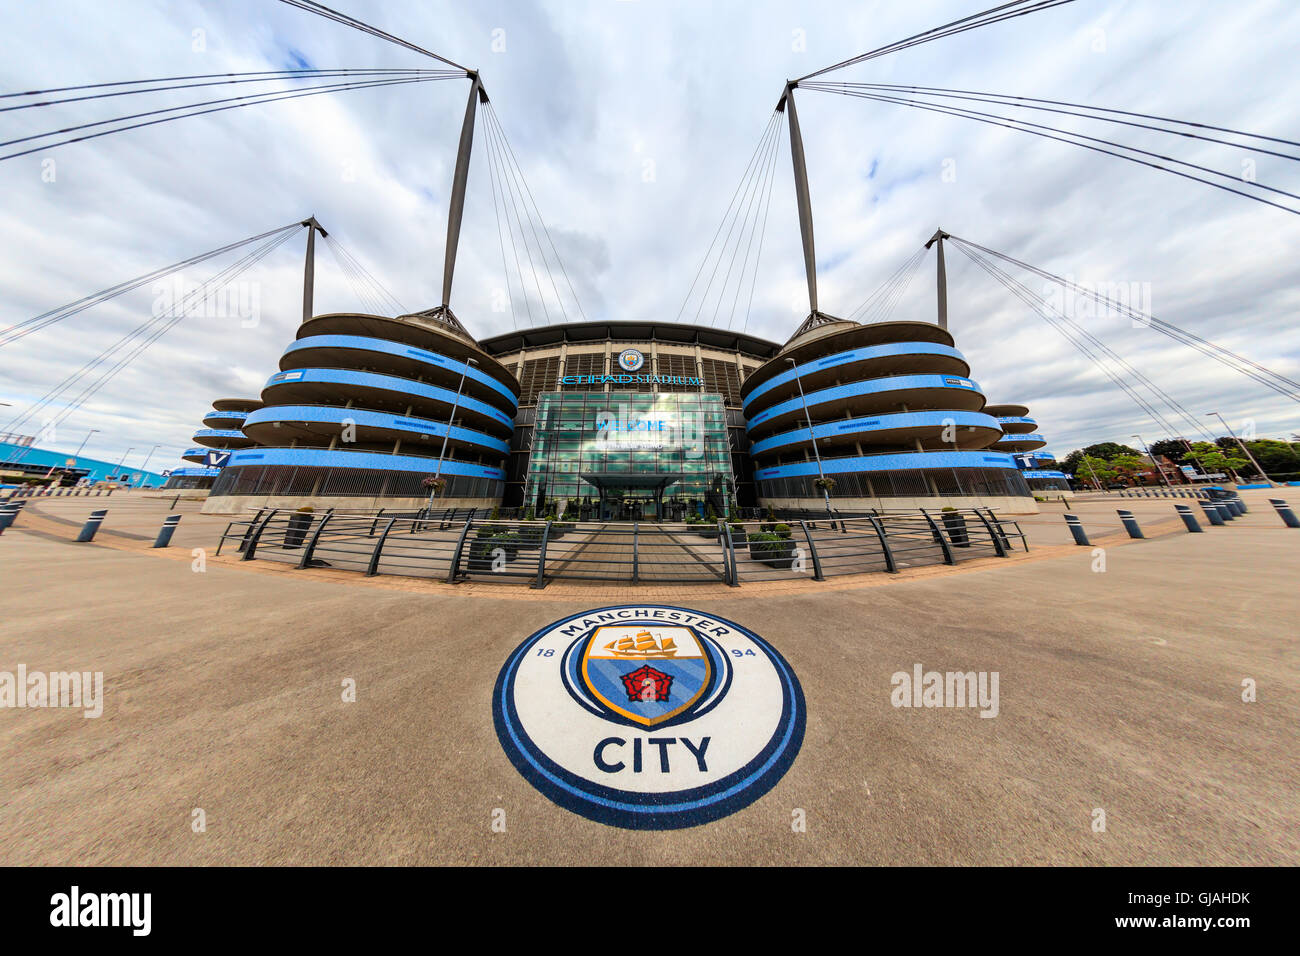 Etihad stadium is home to Manchester City English Premier League football club, one of the most successful clubs in England. Stock Photo